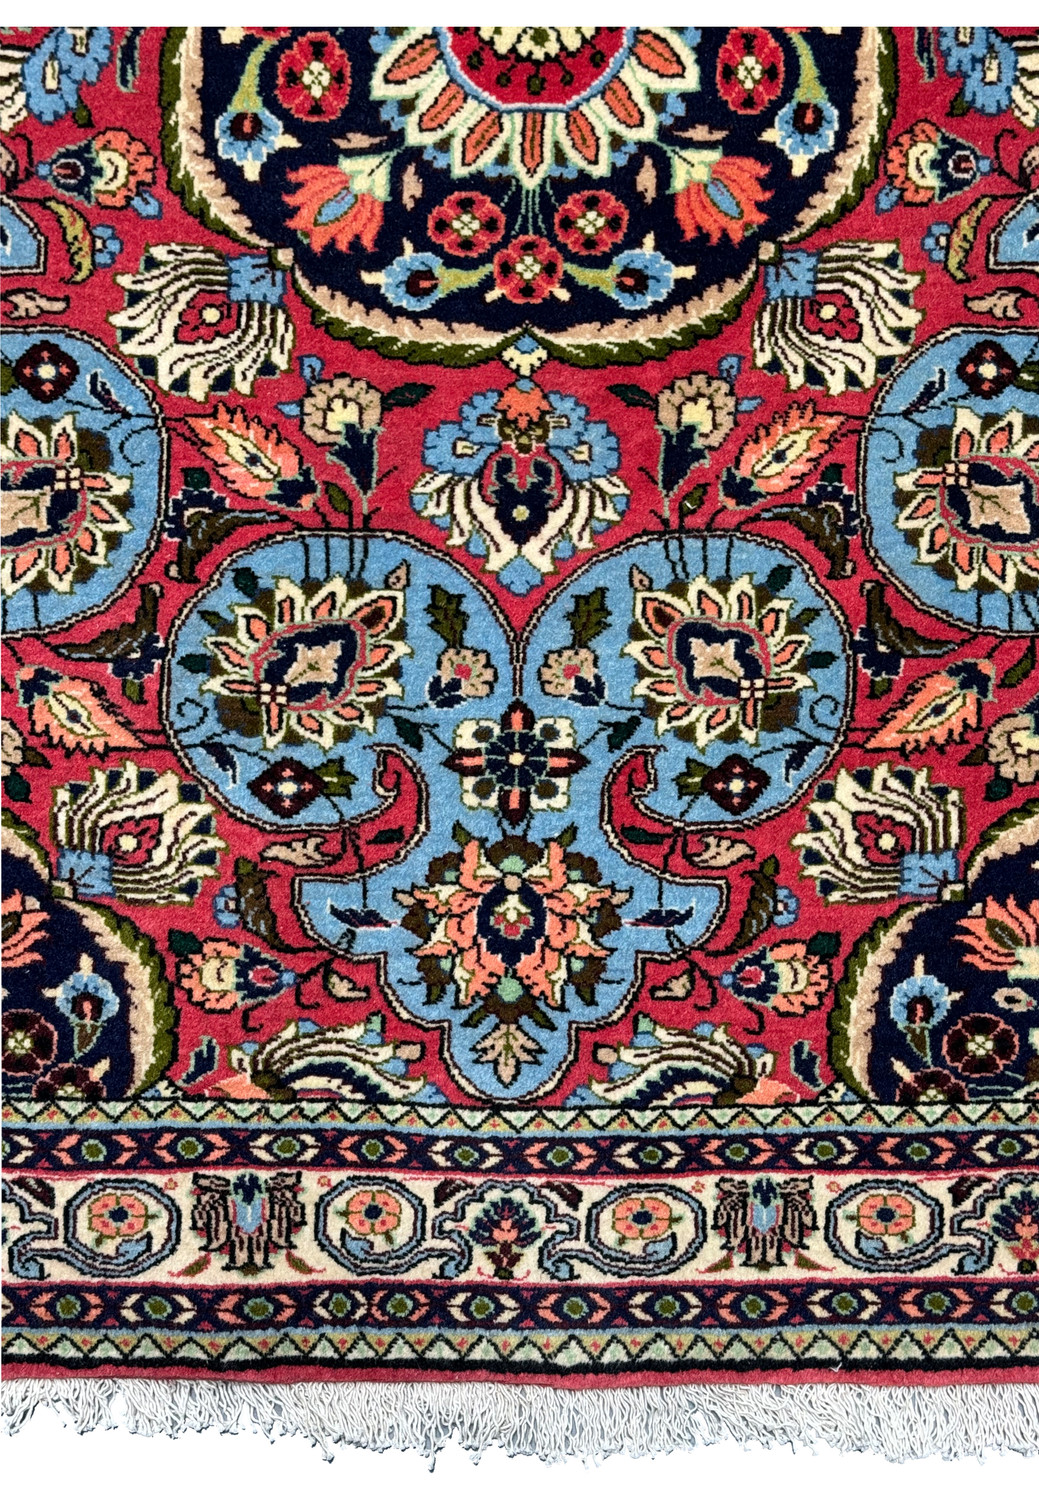 Detailed image of the Persian Bijar rug's pattern intricacy with emphasis on floral motifs and color contrasts, indicative of the luxurious and durable nature of these handmade wool rugs.